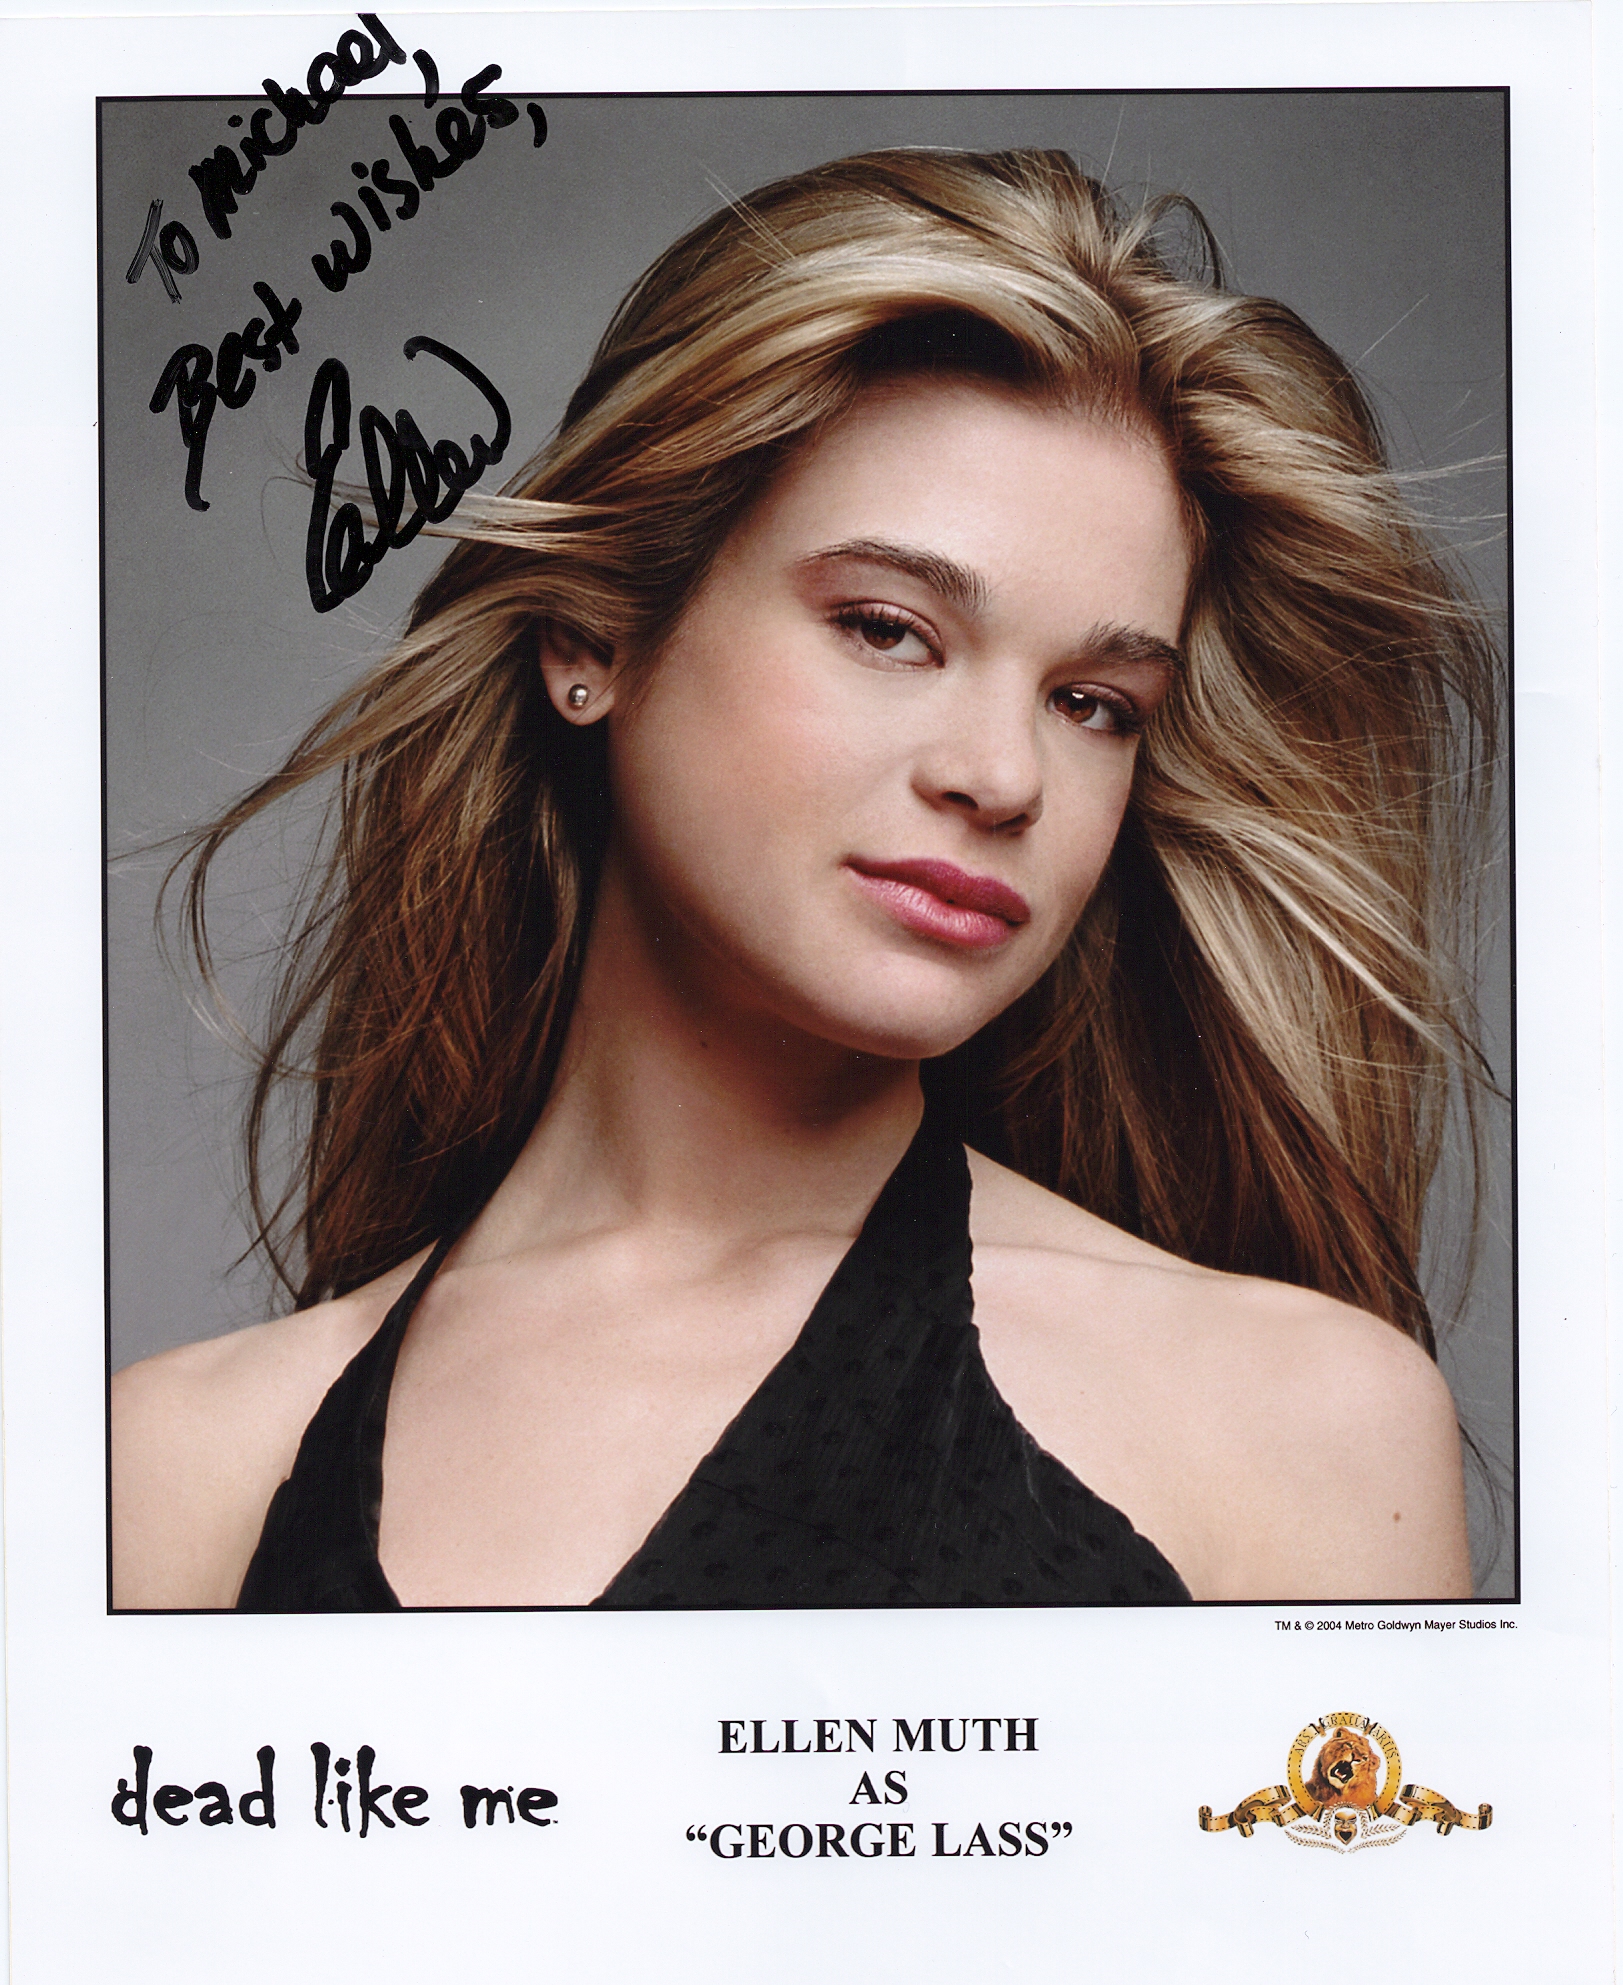 Ellen Muth, star of the Showtime TV series "Dead Like Me". 